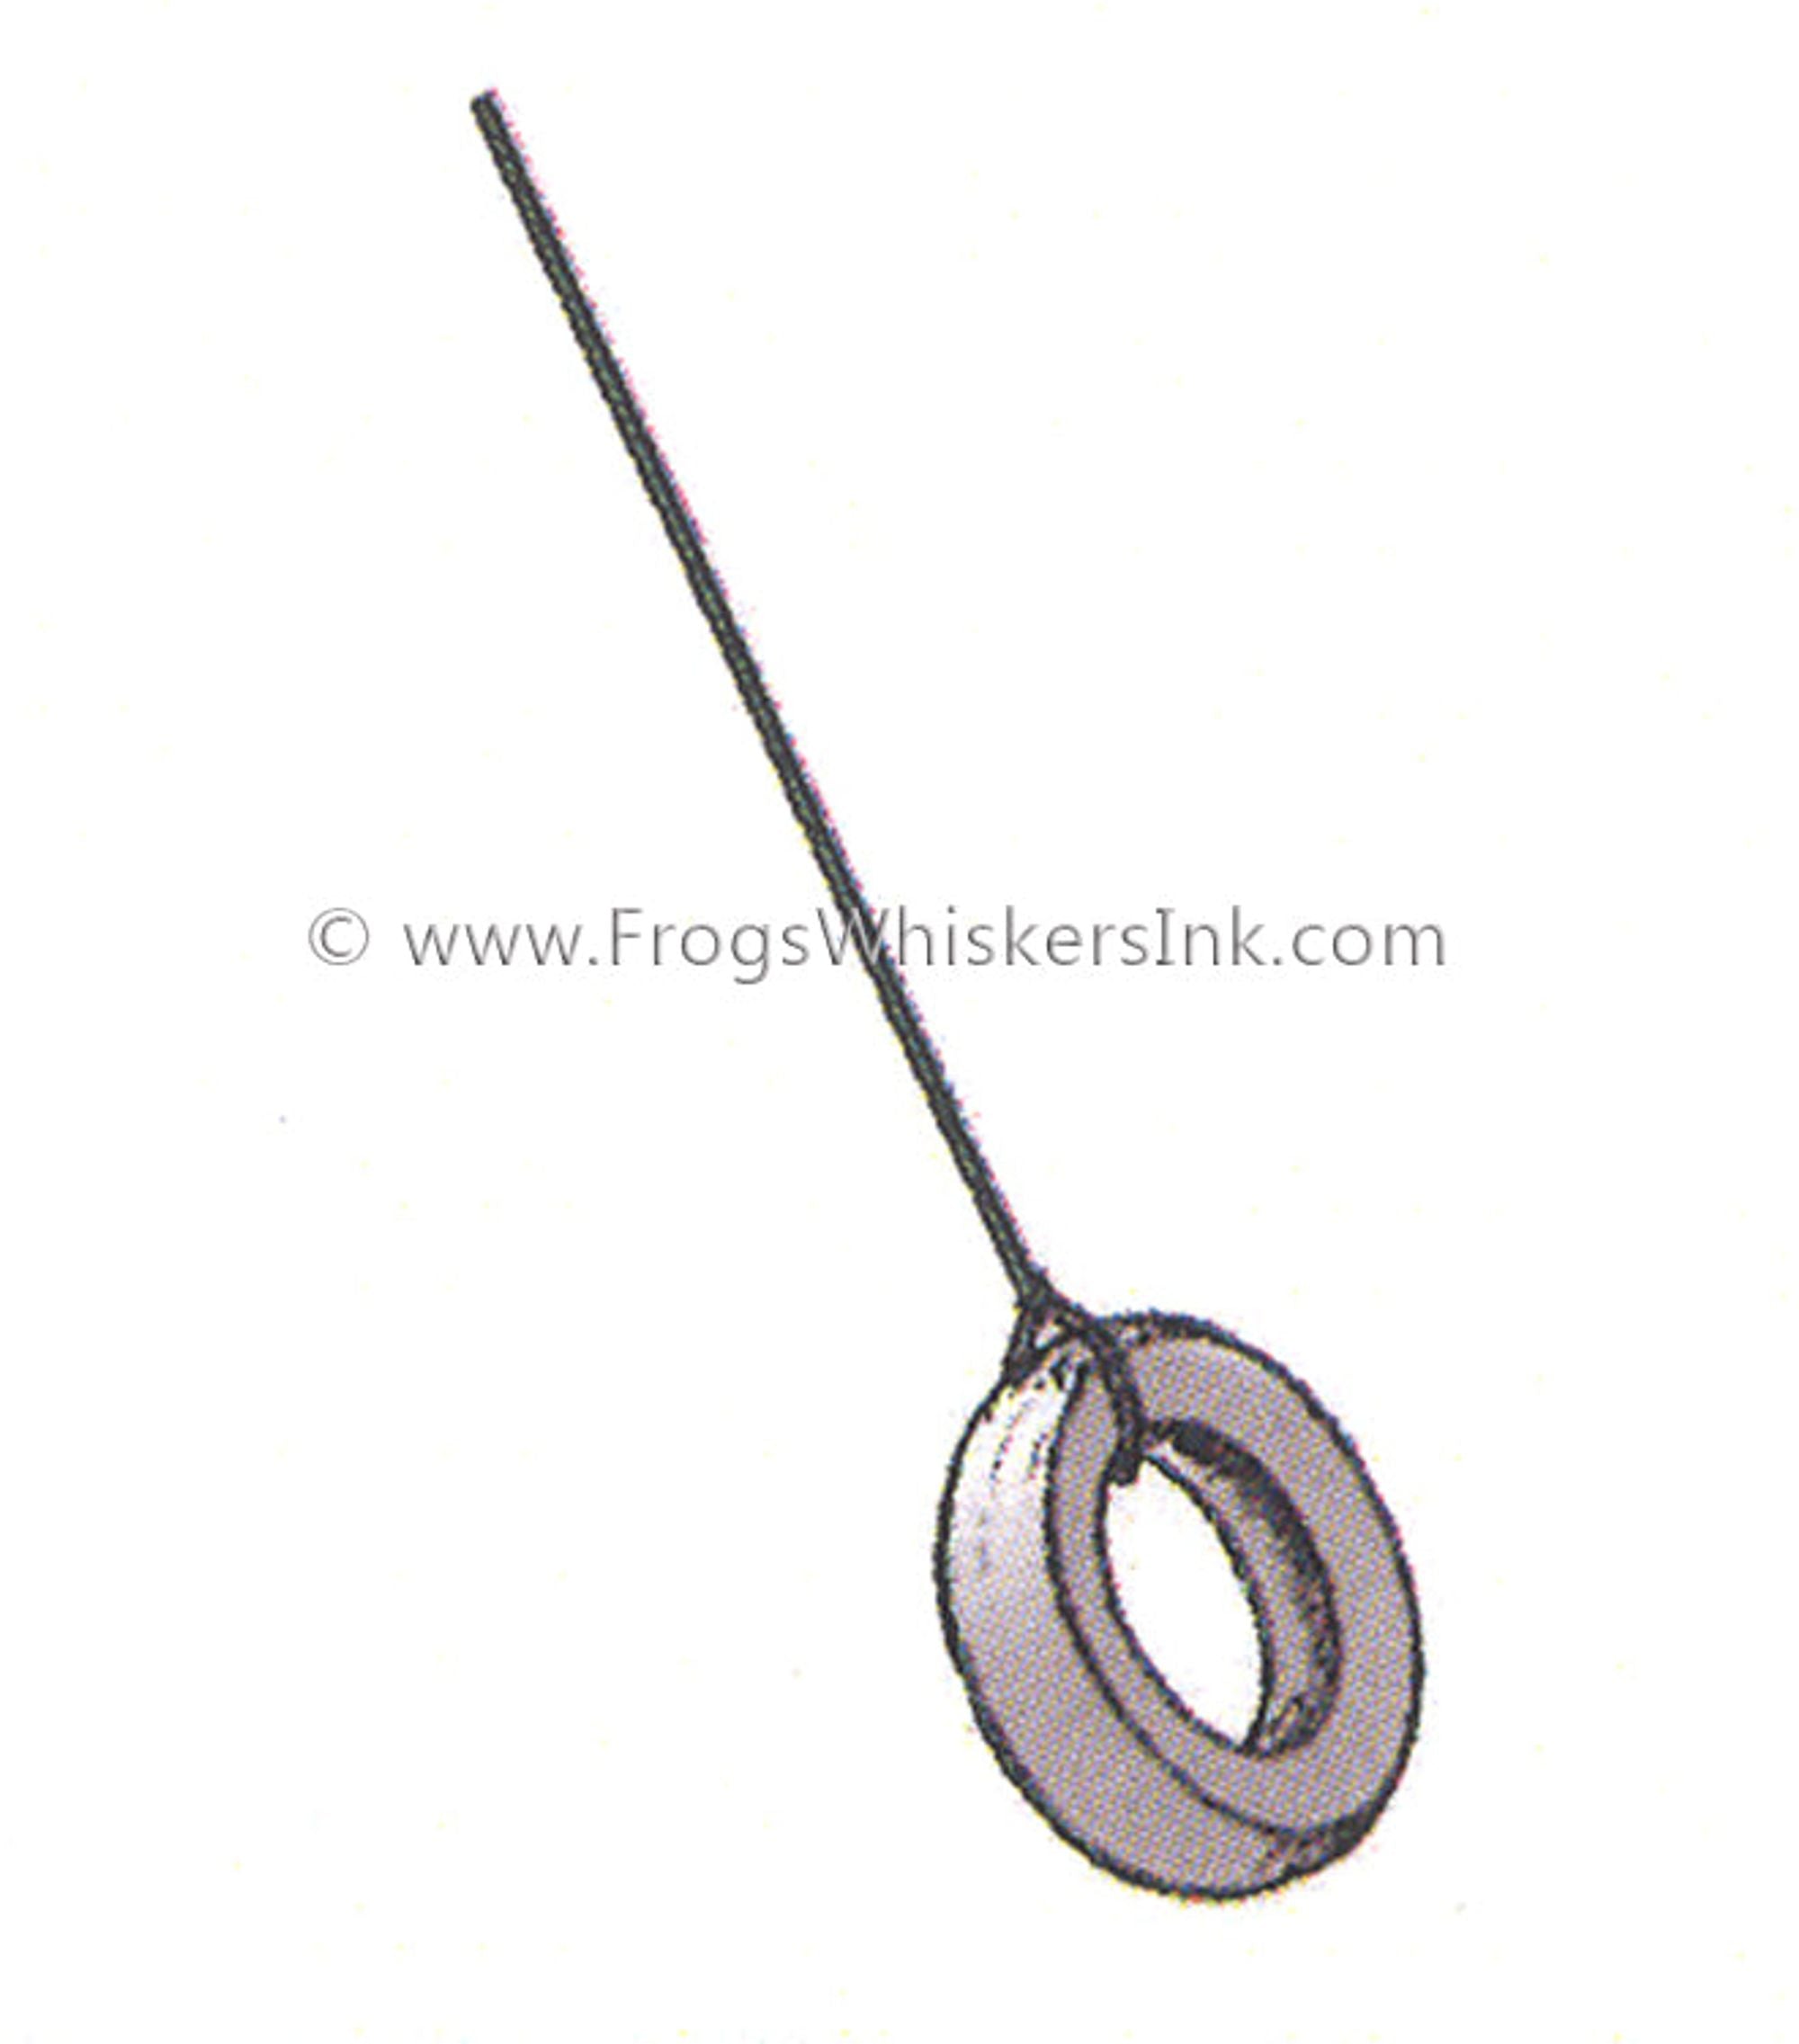 Frog's Whiskers Ink Stamp - Tire Swing